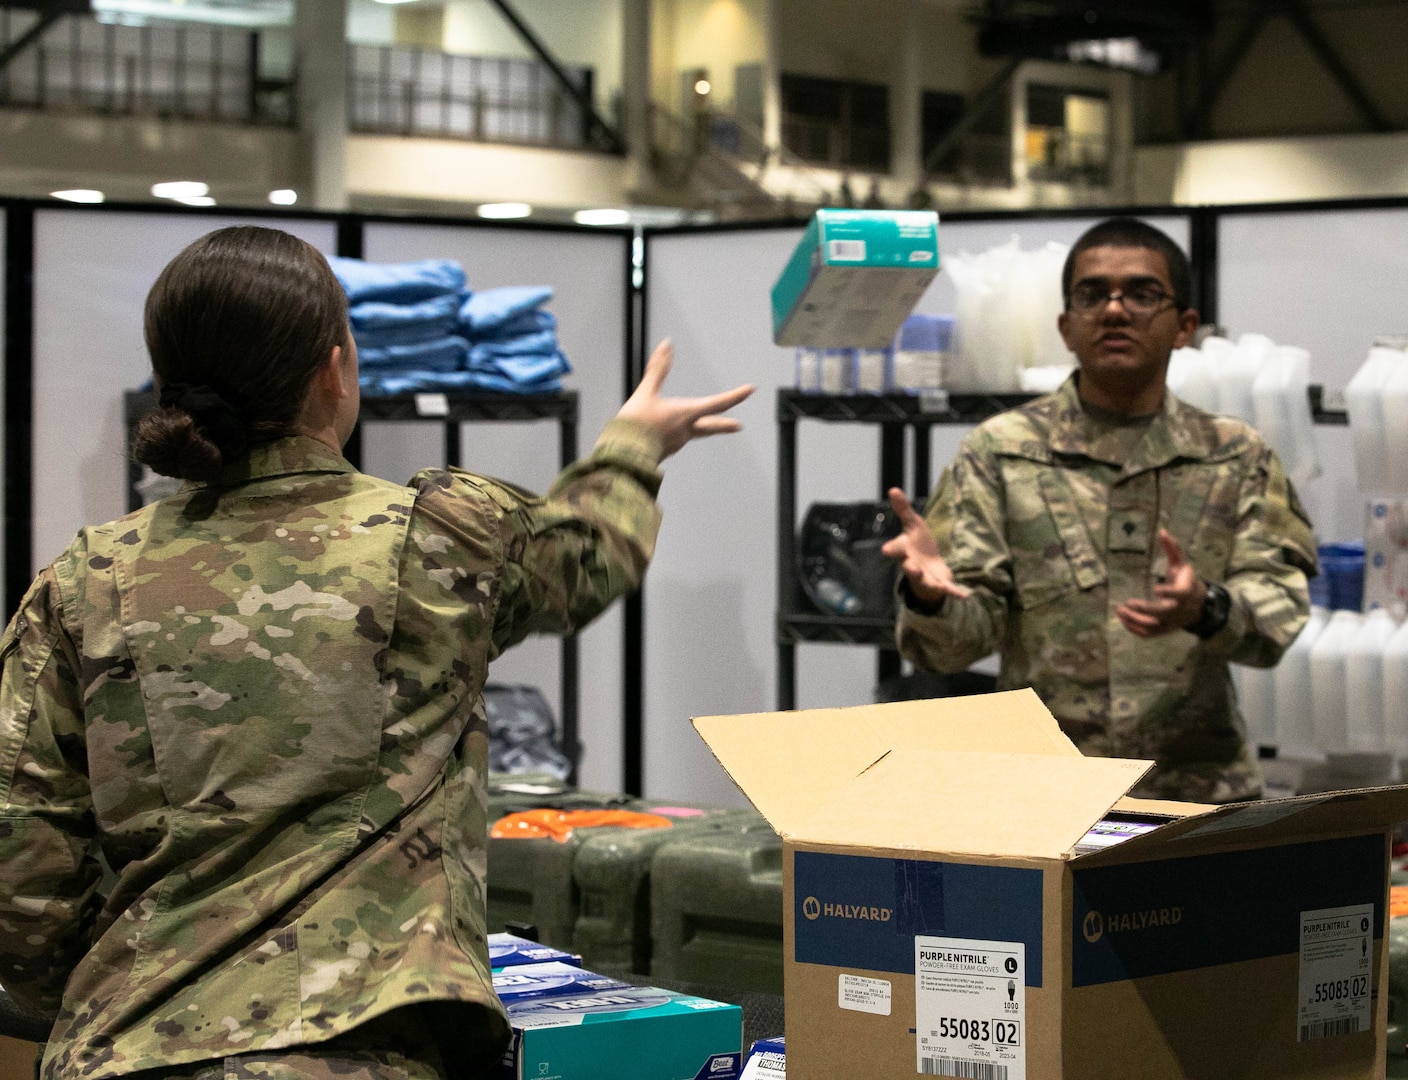 A female soldier tosses a small box in the air toward a male soldier in a storage room.